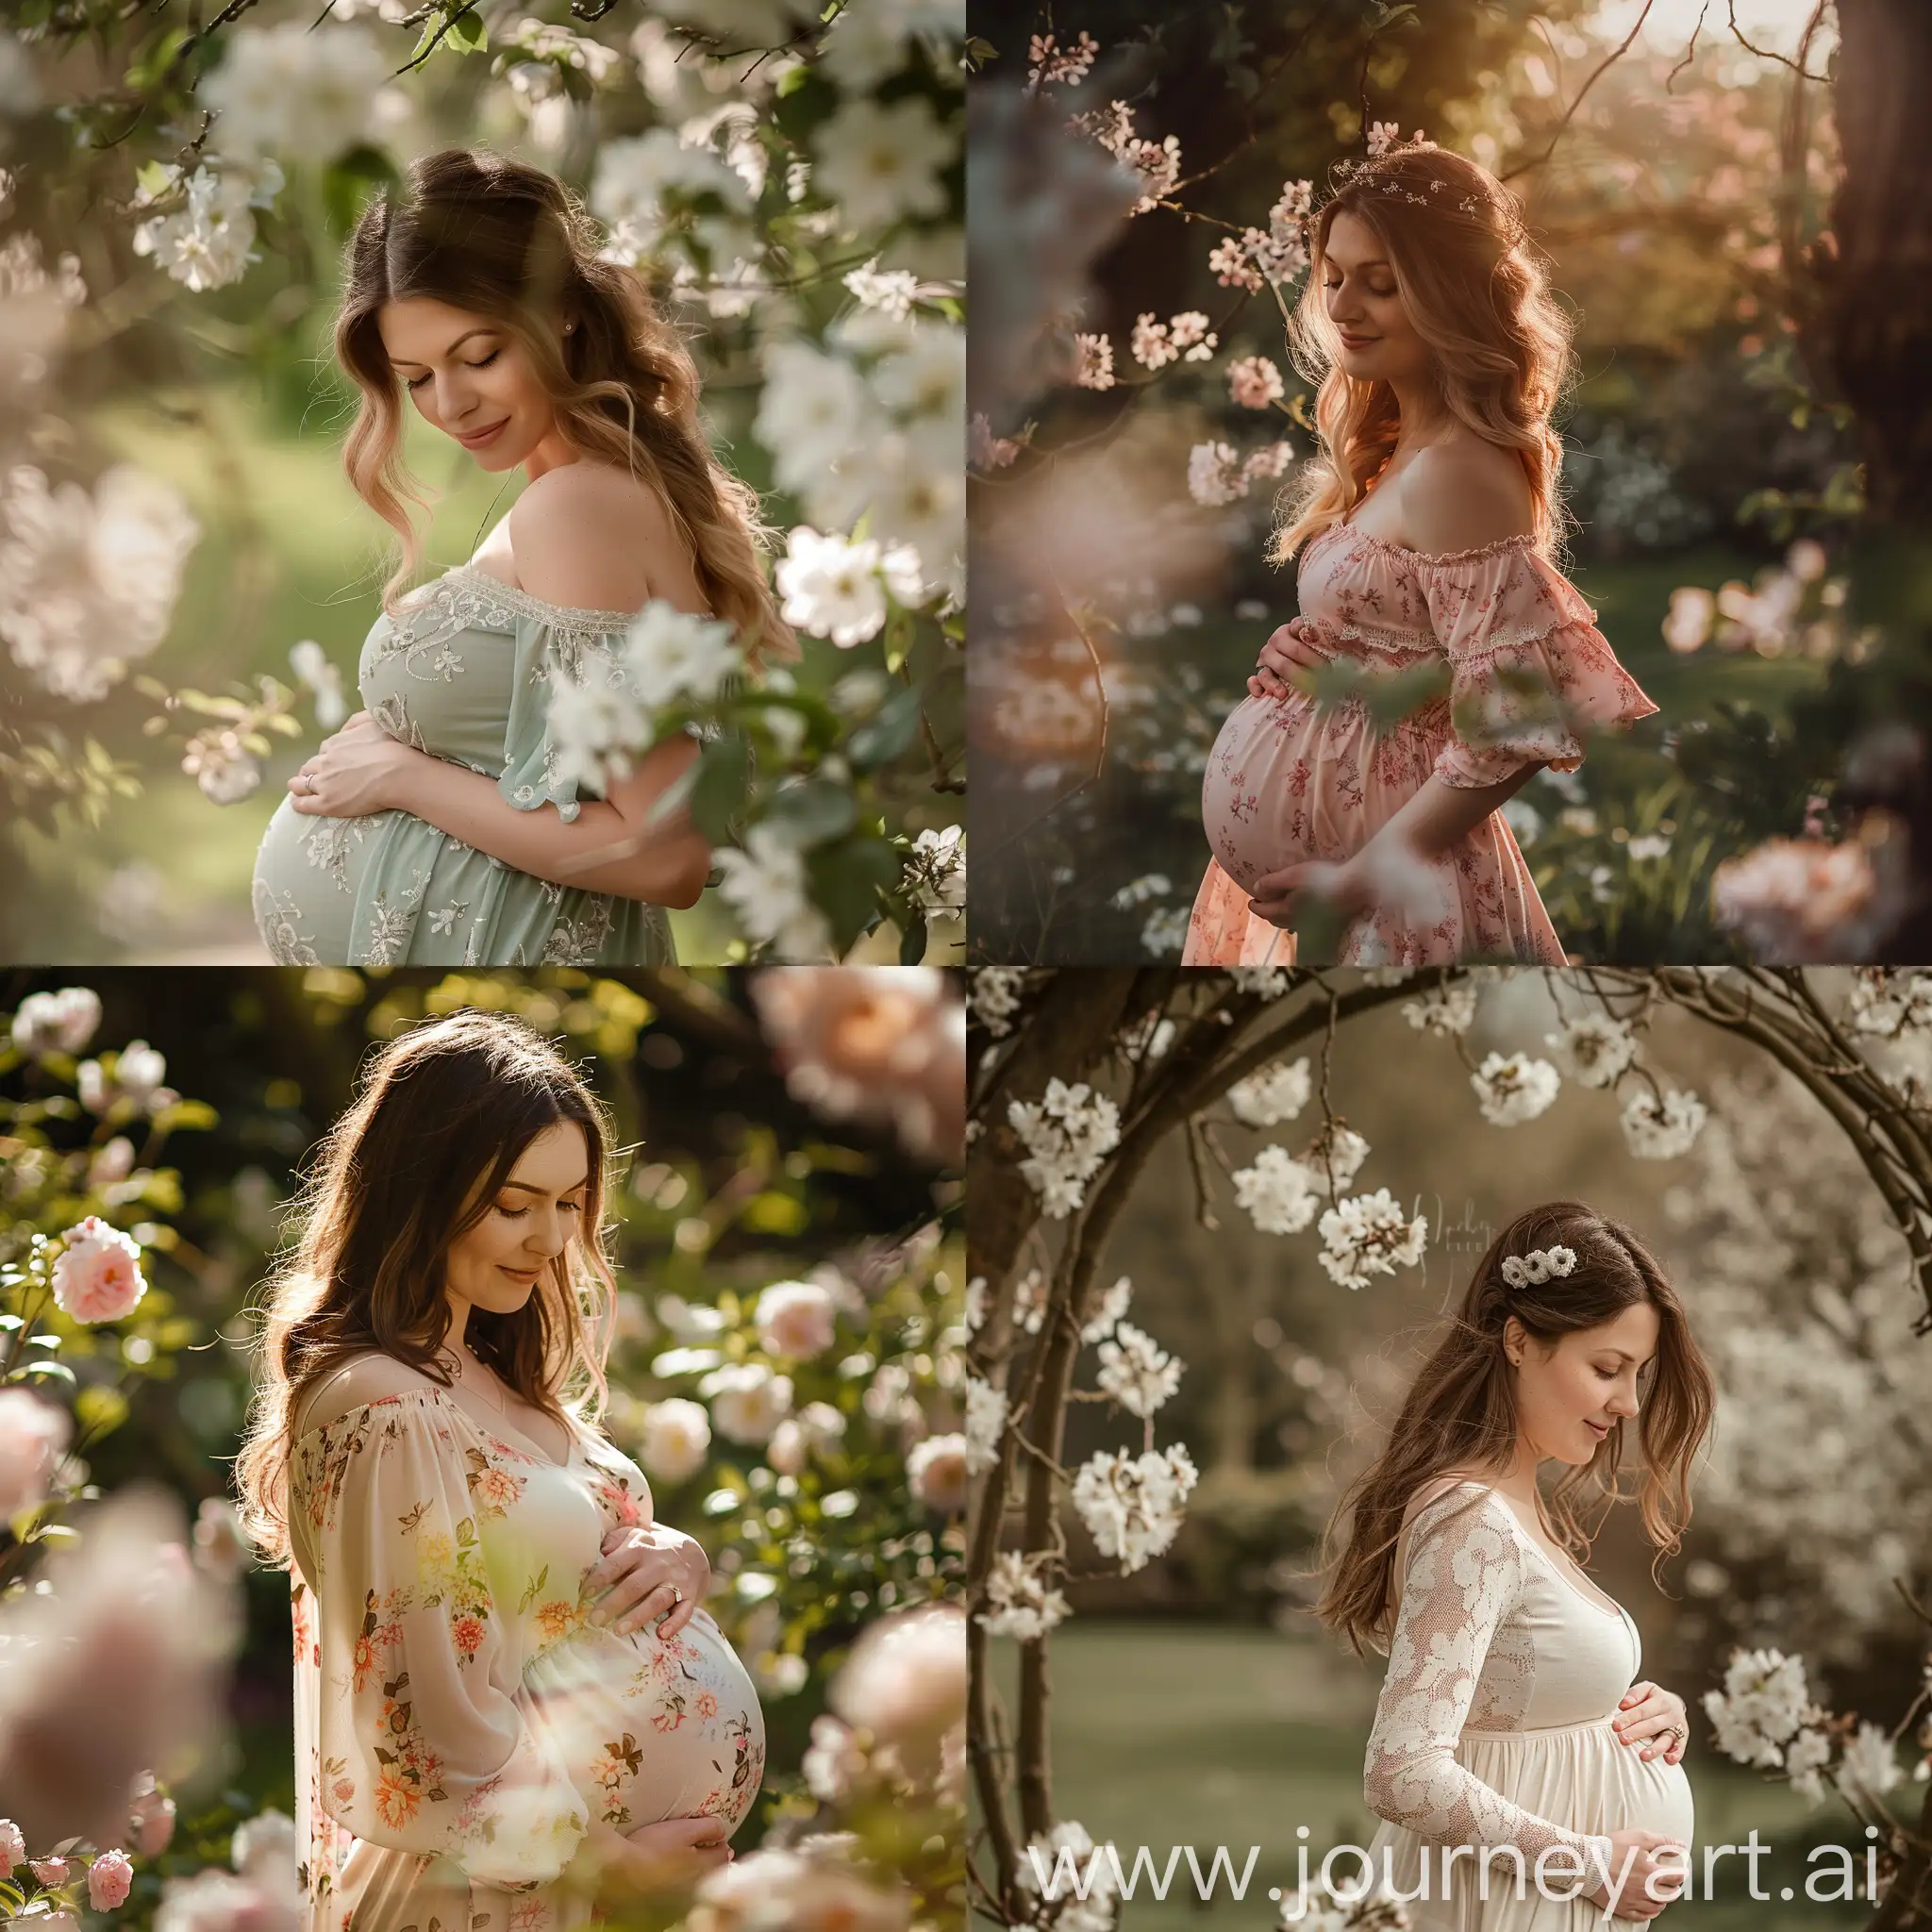 Spring-Pregnancy-Photoshoot-in-Leamington-Spa-Blossoming-Beauty-Amidst-Nature